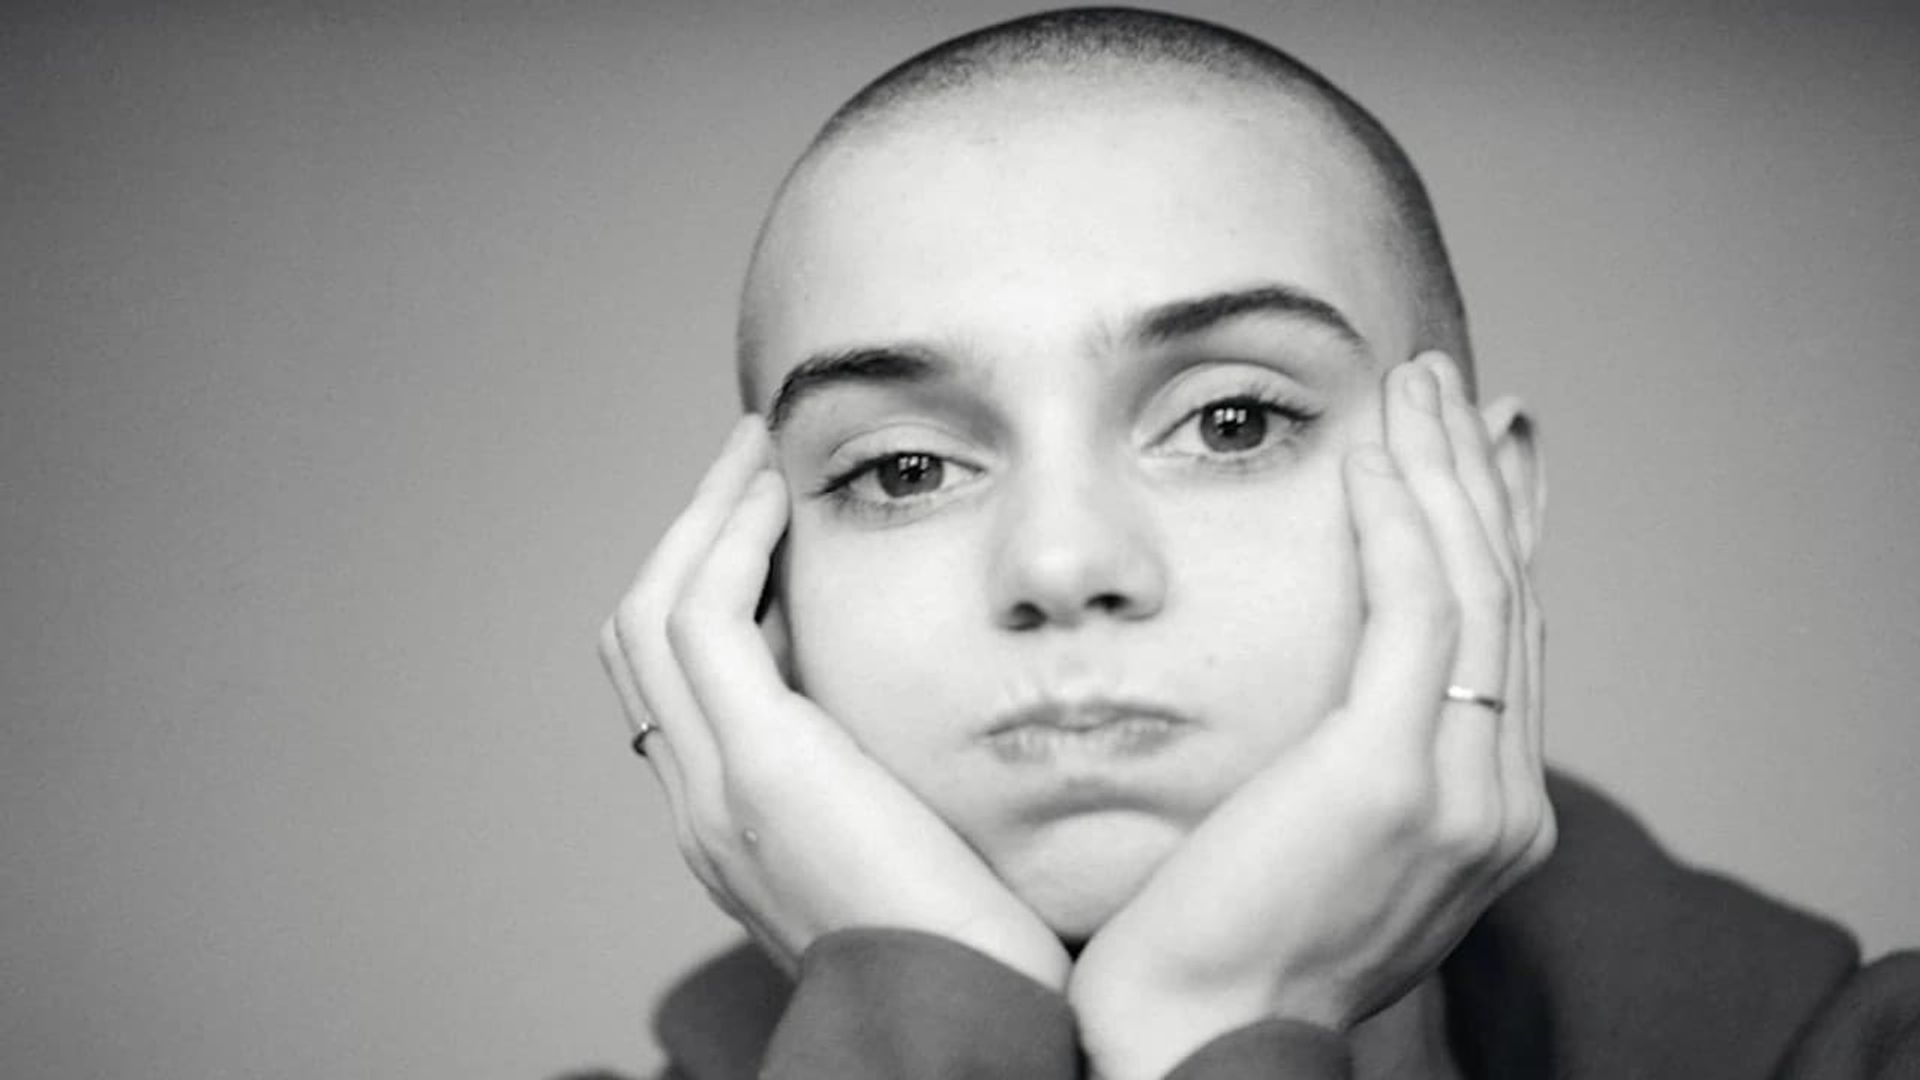 Sinead O'Connor: Year of the Horse background